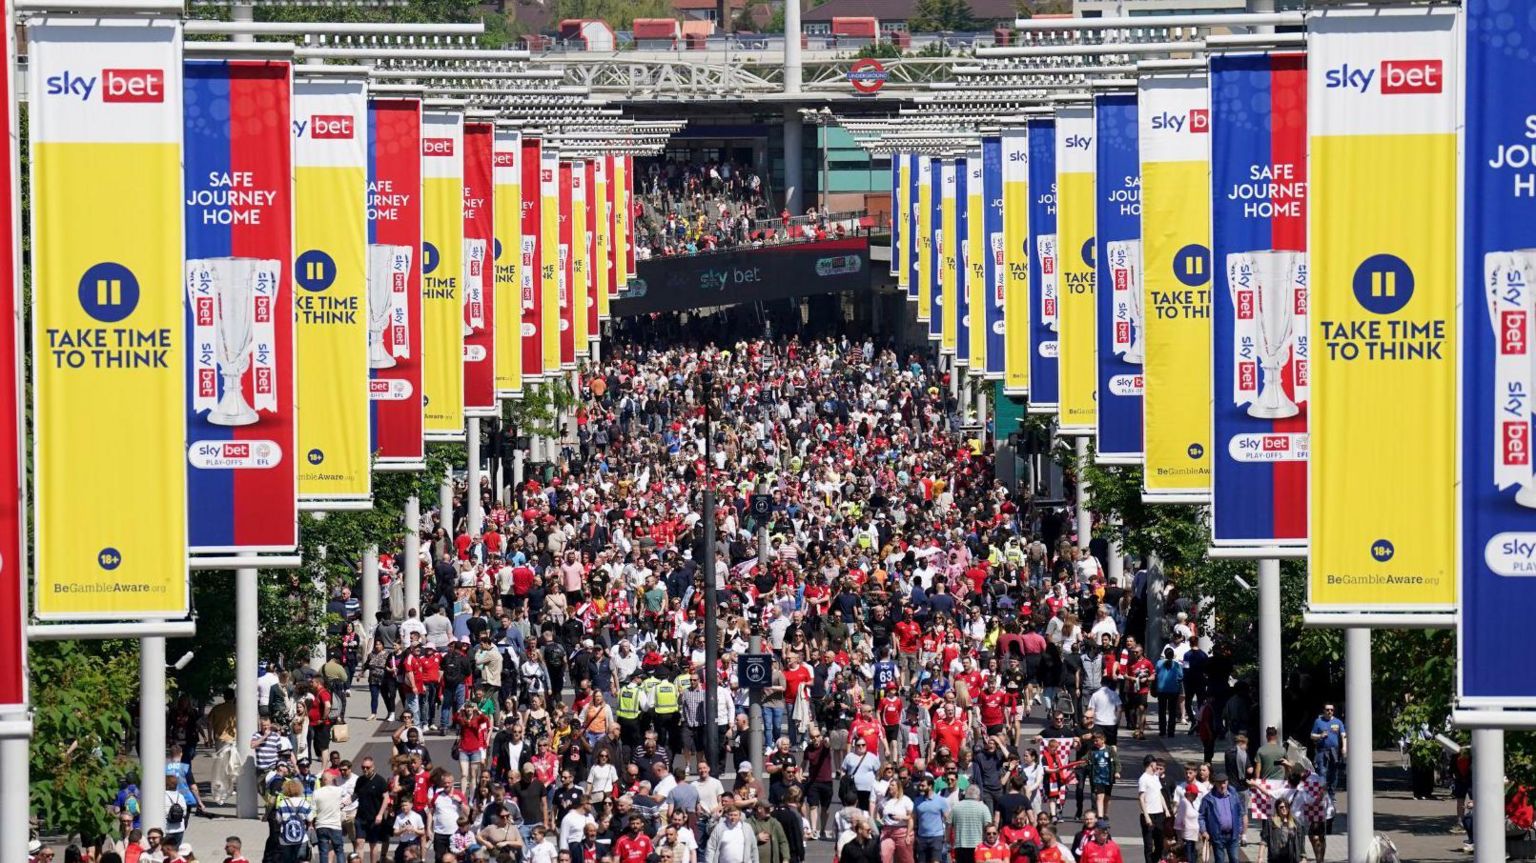 Fans make their way along Wembley Way towards the ground ahead of the game